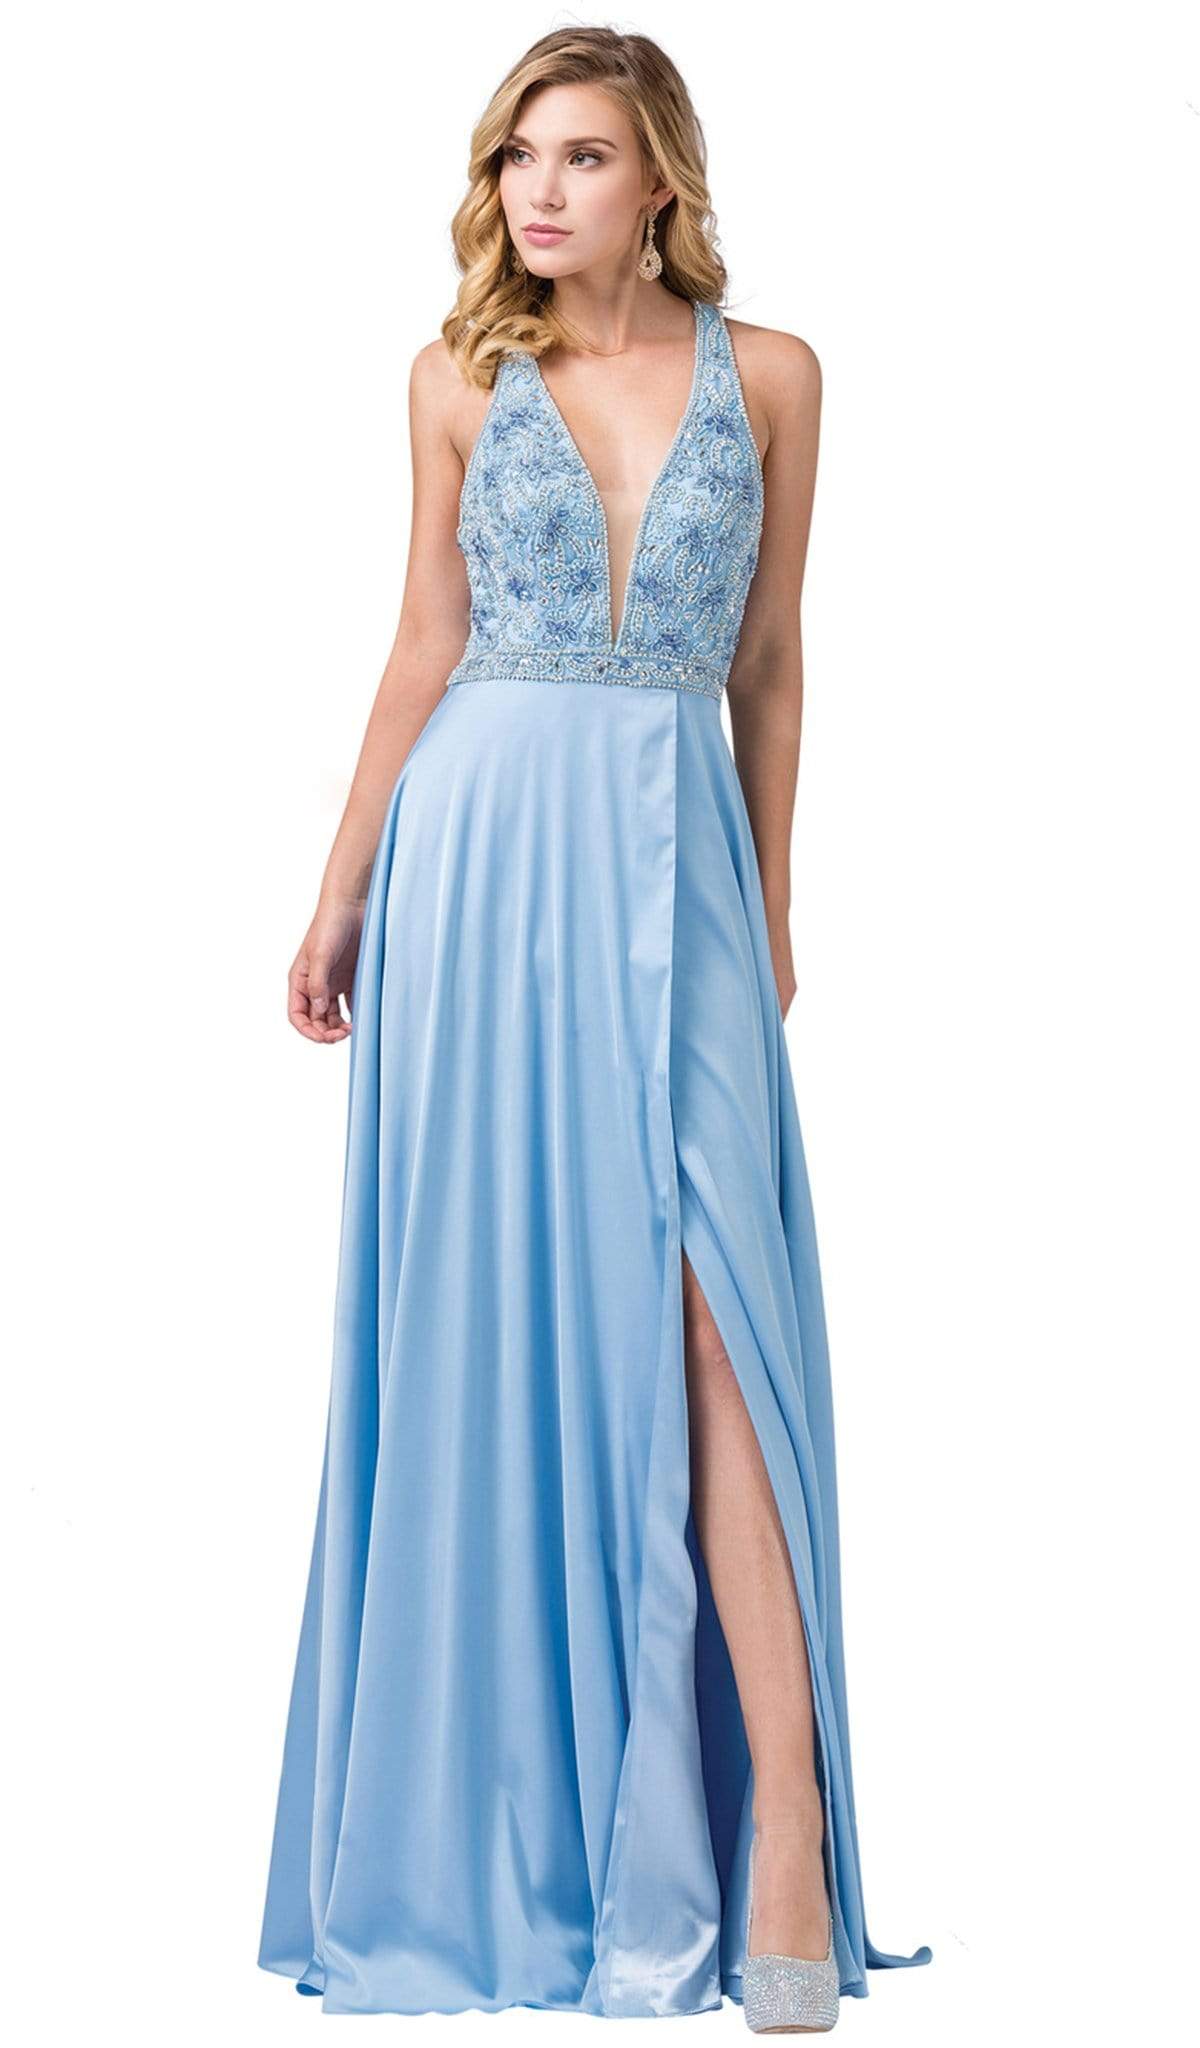 Dancing Queen - 2527 Beaded Crisscrossed Back High Slit Gown Prom Dresses XS / Sky Blue